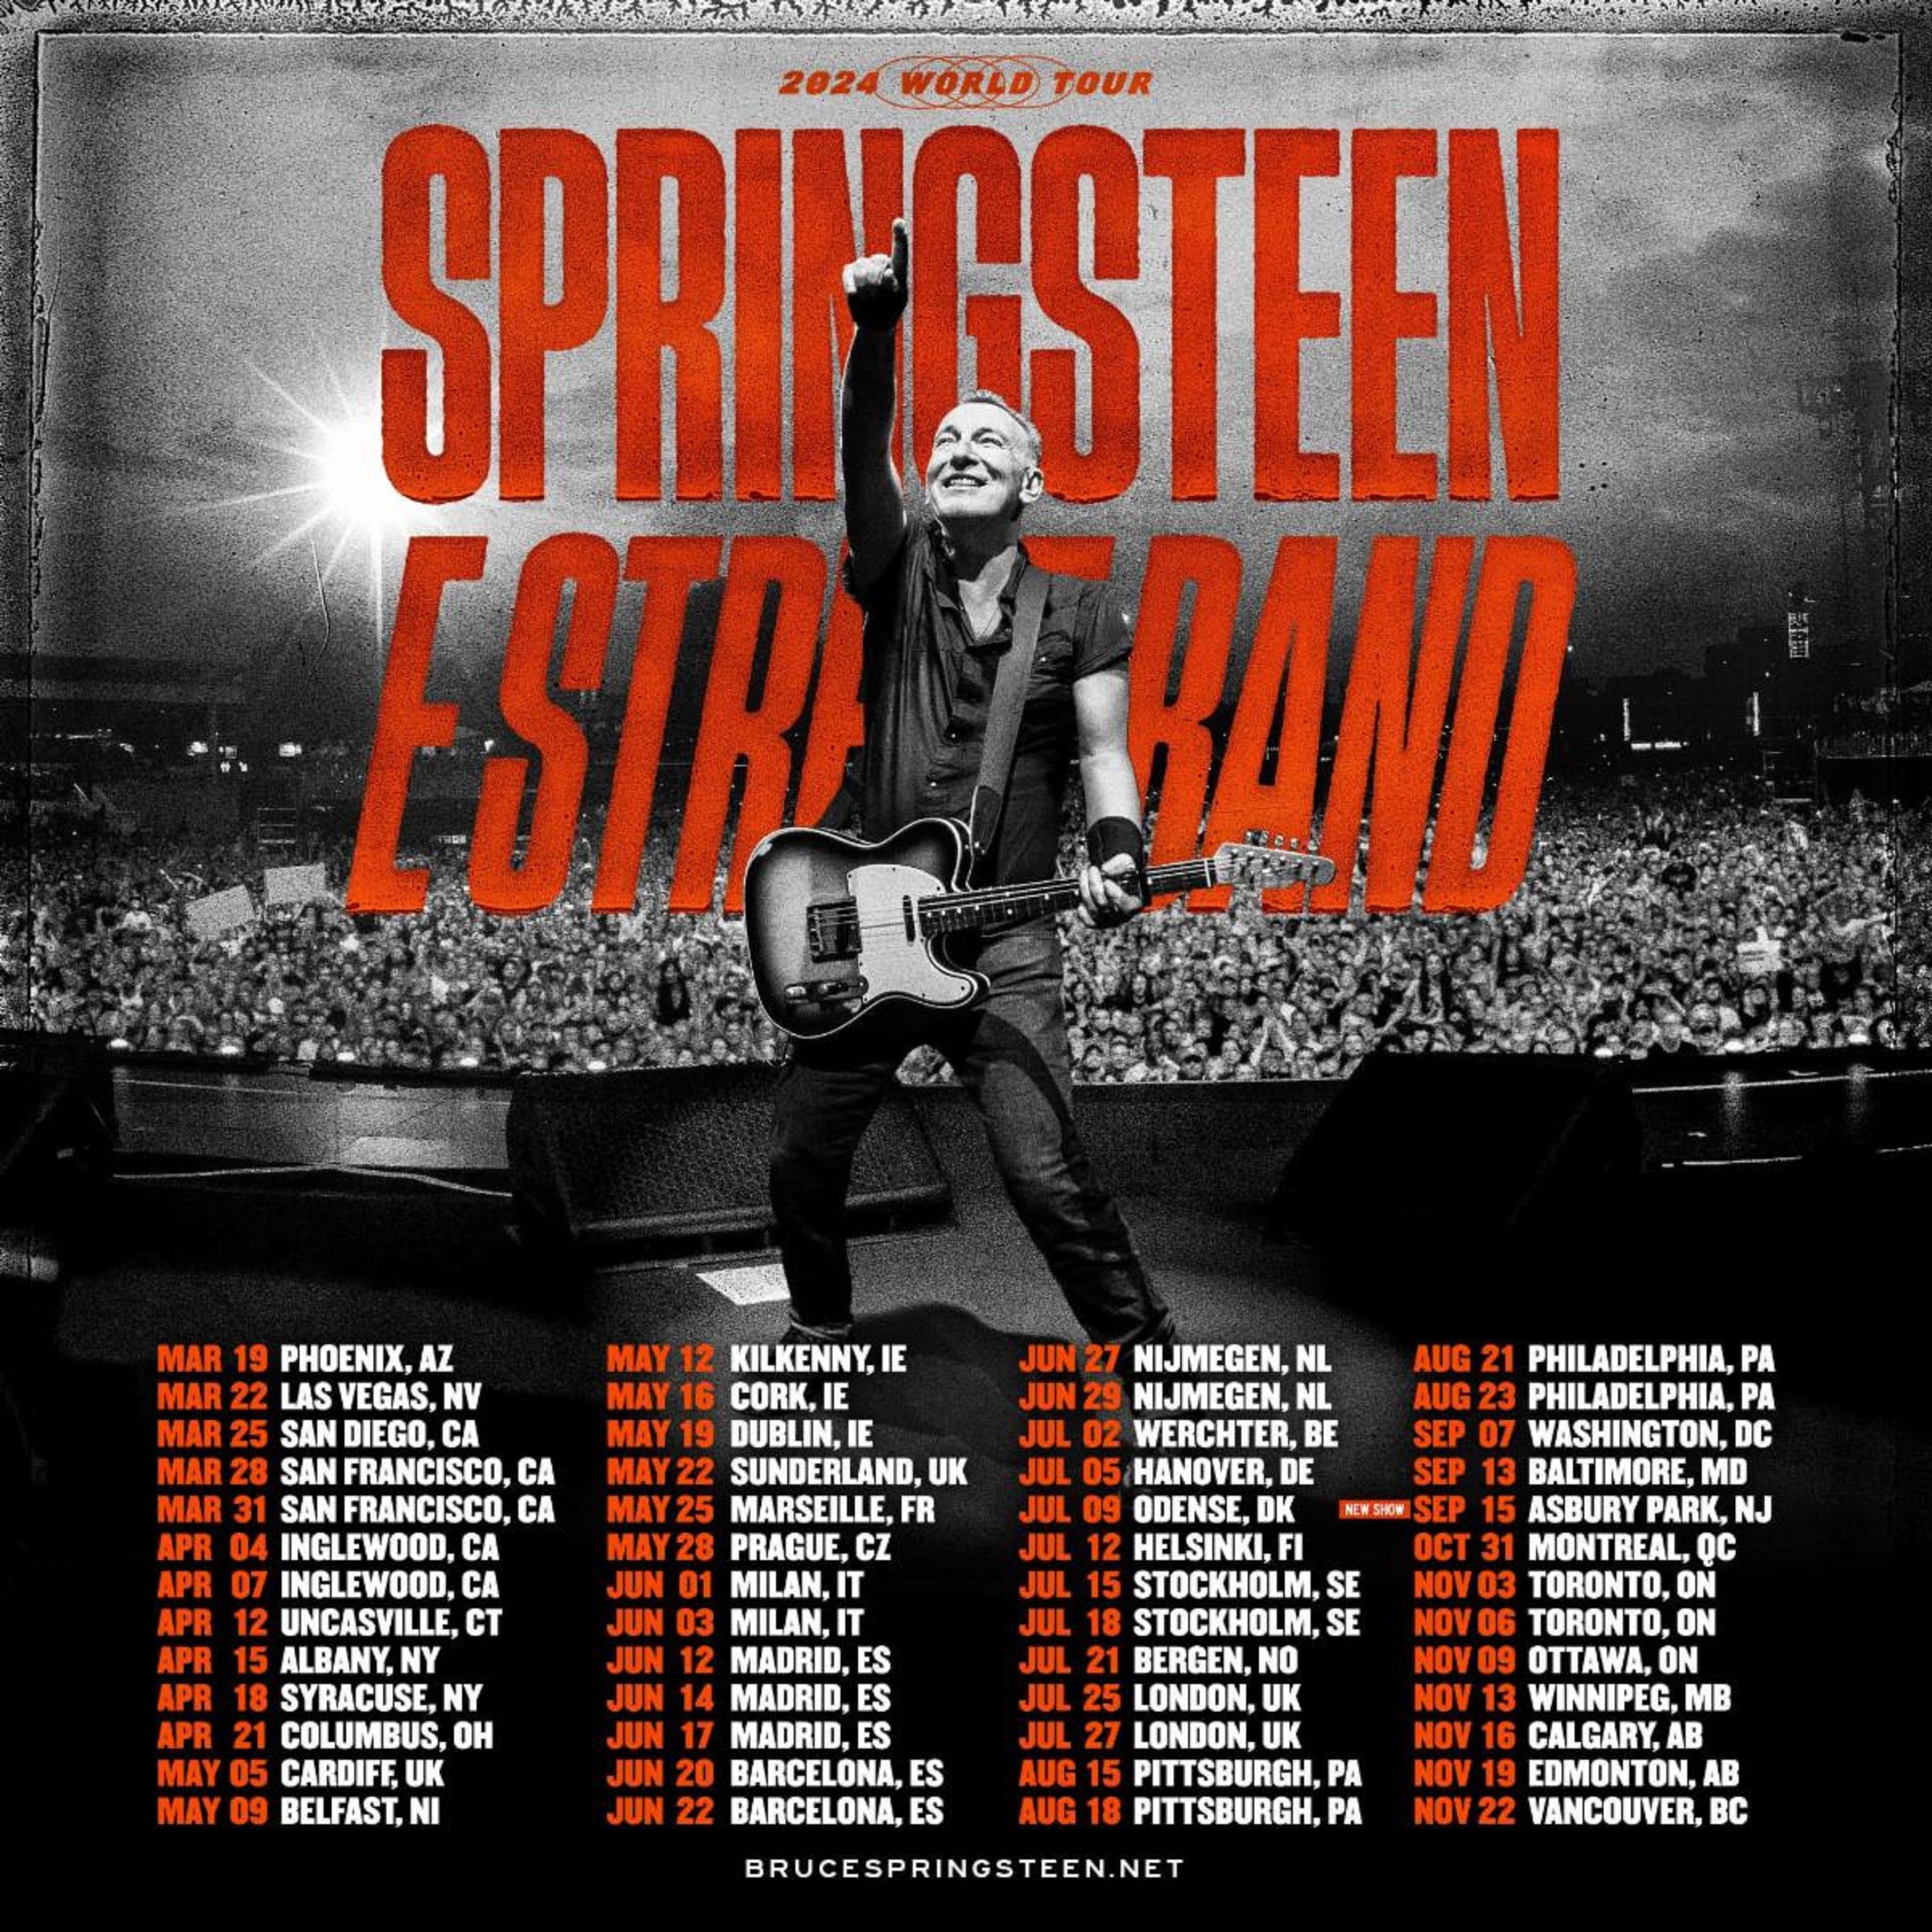 Bruce Springsteen and The E Street Band Kick Off 2024 World Tour This Month